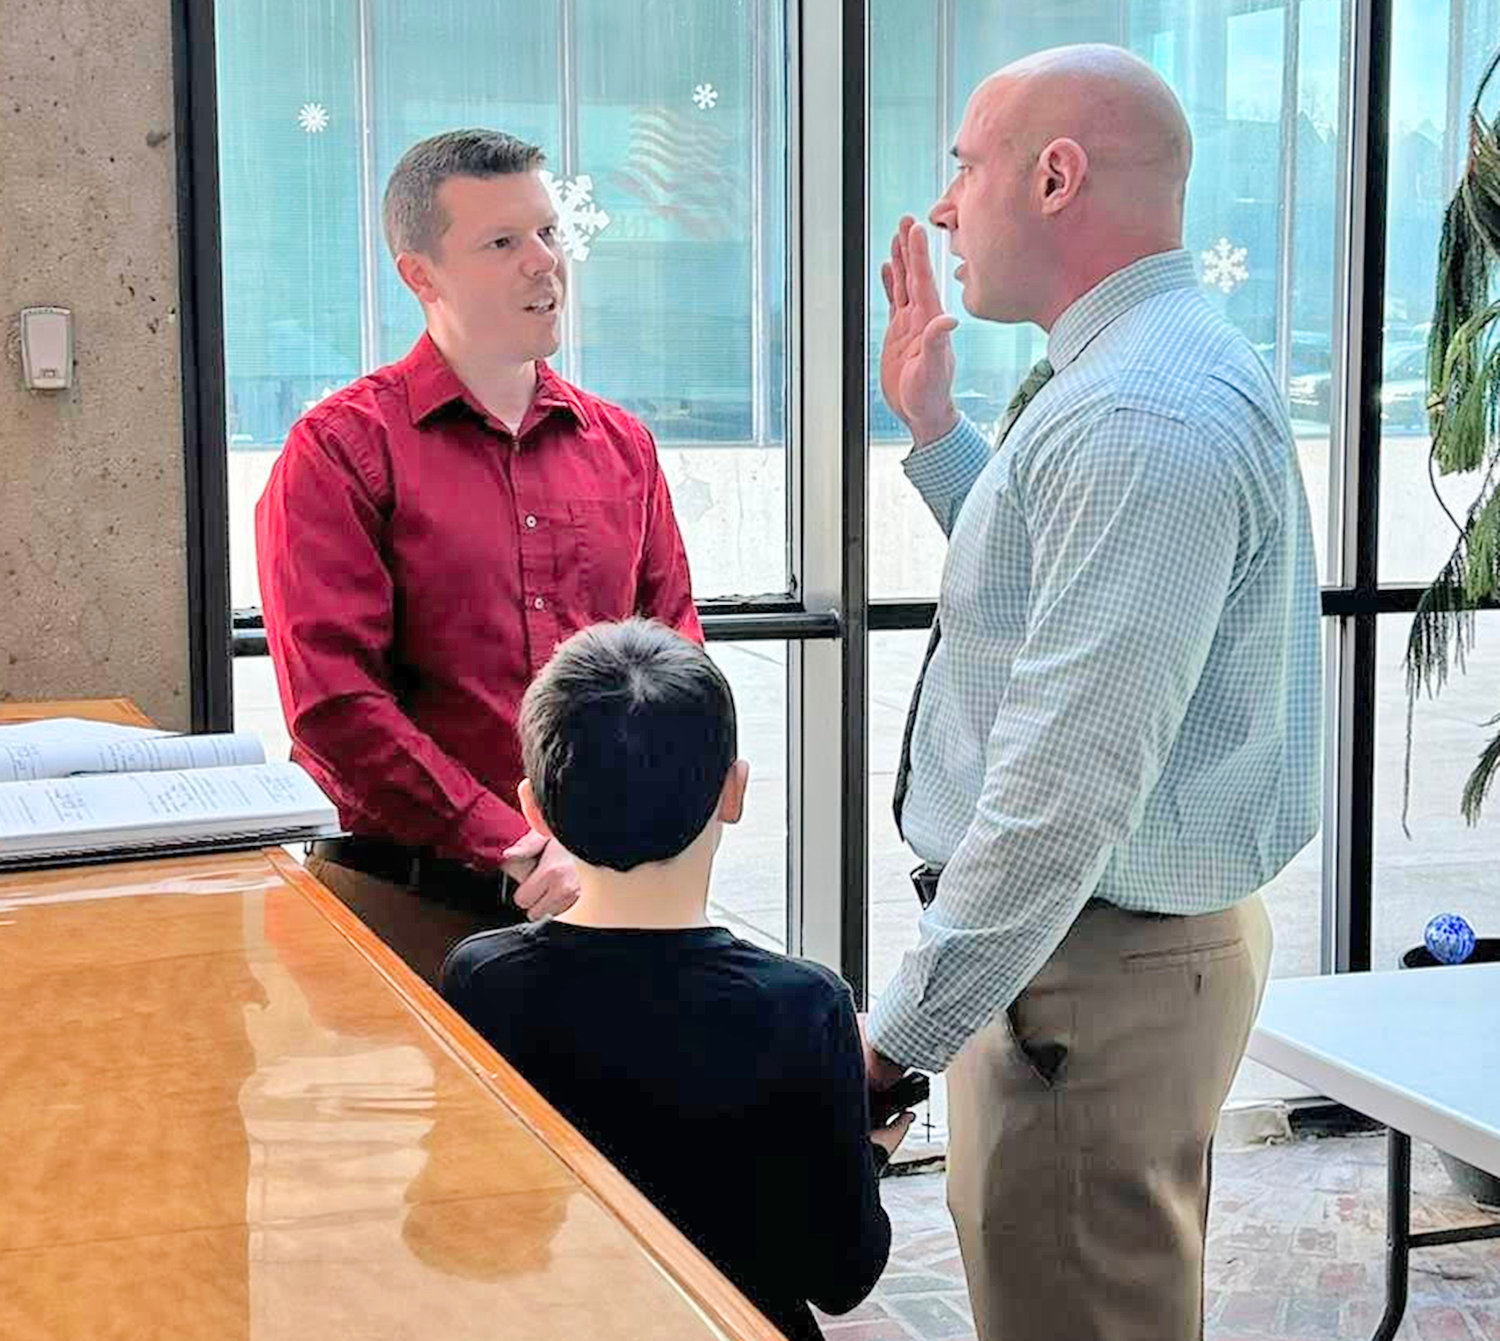 Rome Police Officer Michael Uhl is sworn into service as his son holds the Bible on Friday, by Rome City Clerk Eric Seeley. Uhl is rejoining the department after serving a stint with the Town of Webb Police Department in Herkimer County.